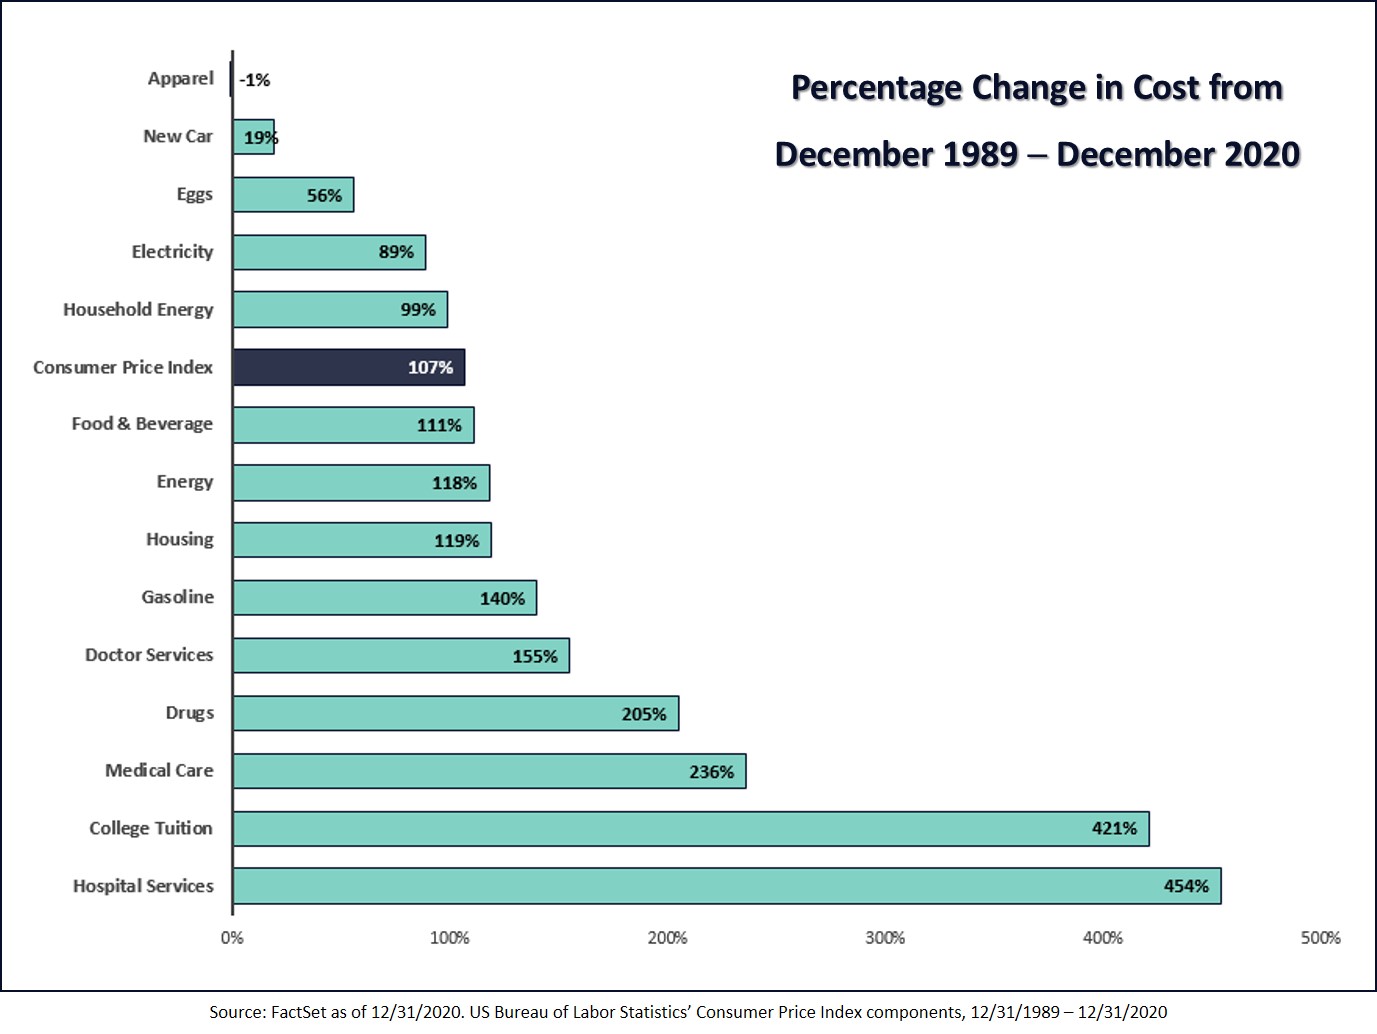 Percentage Change in Cost